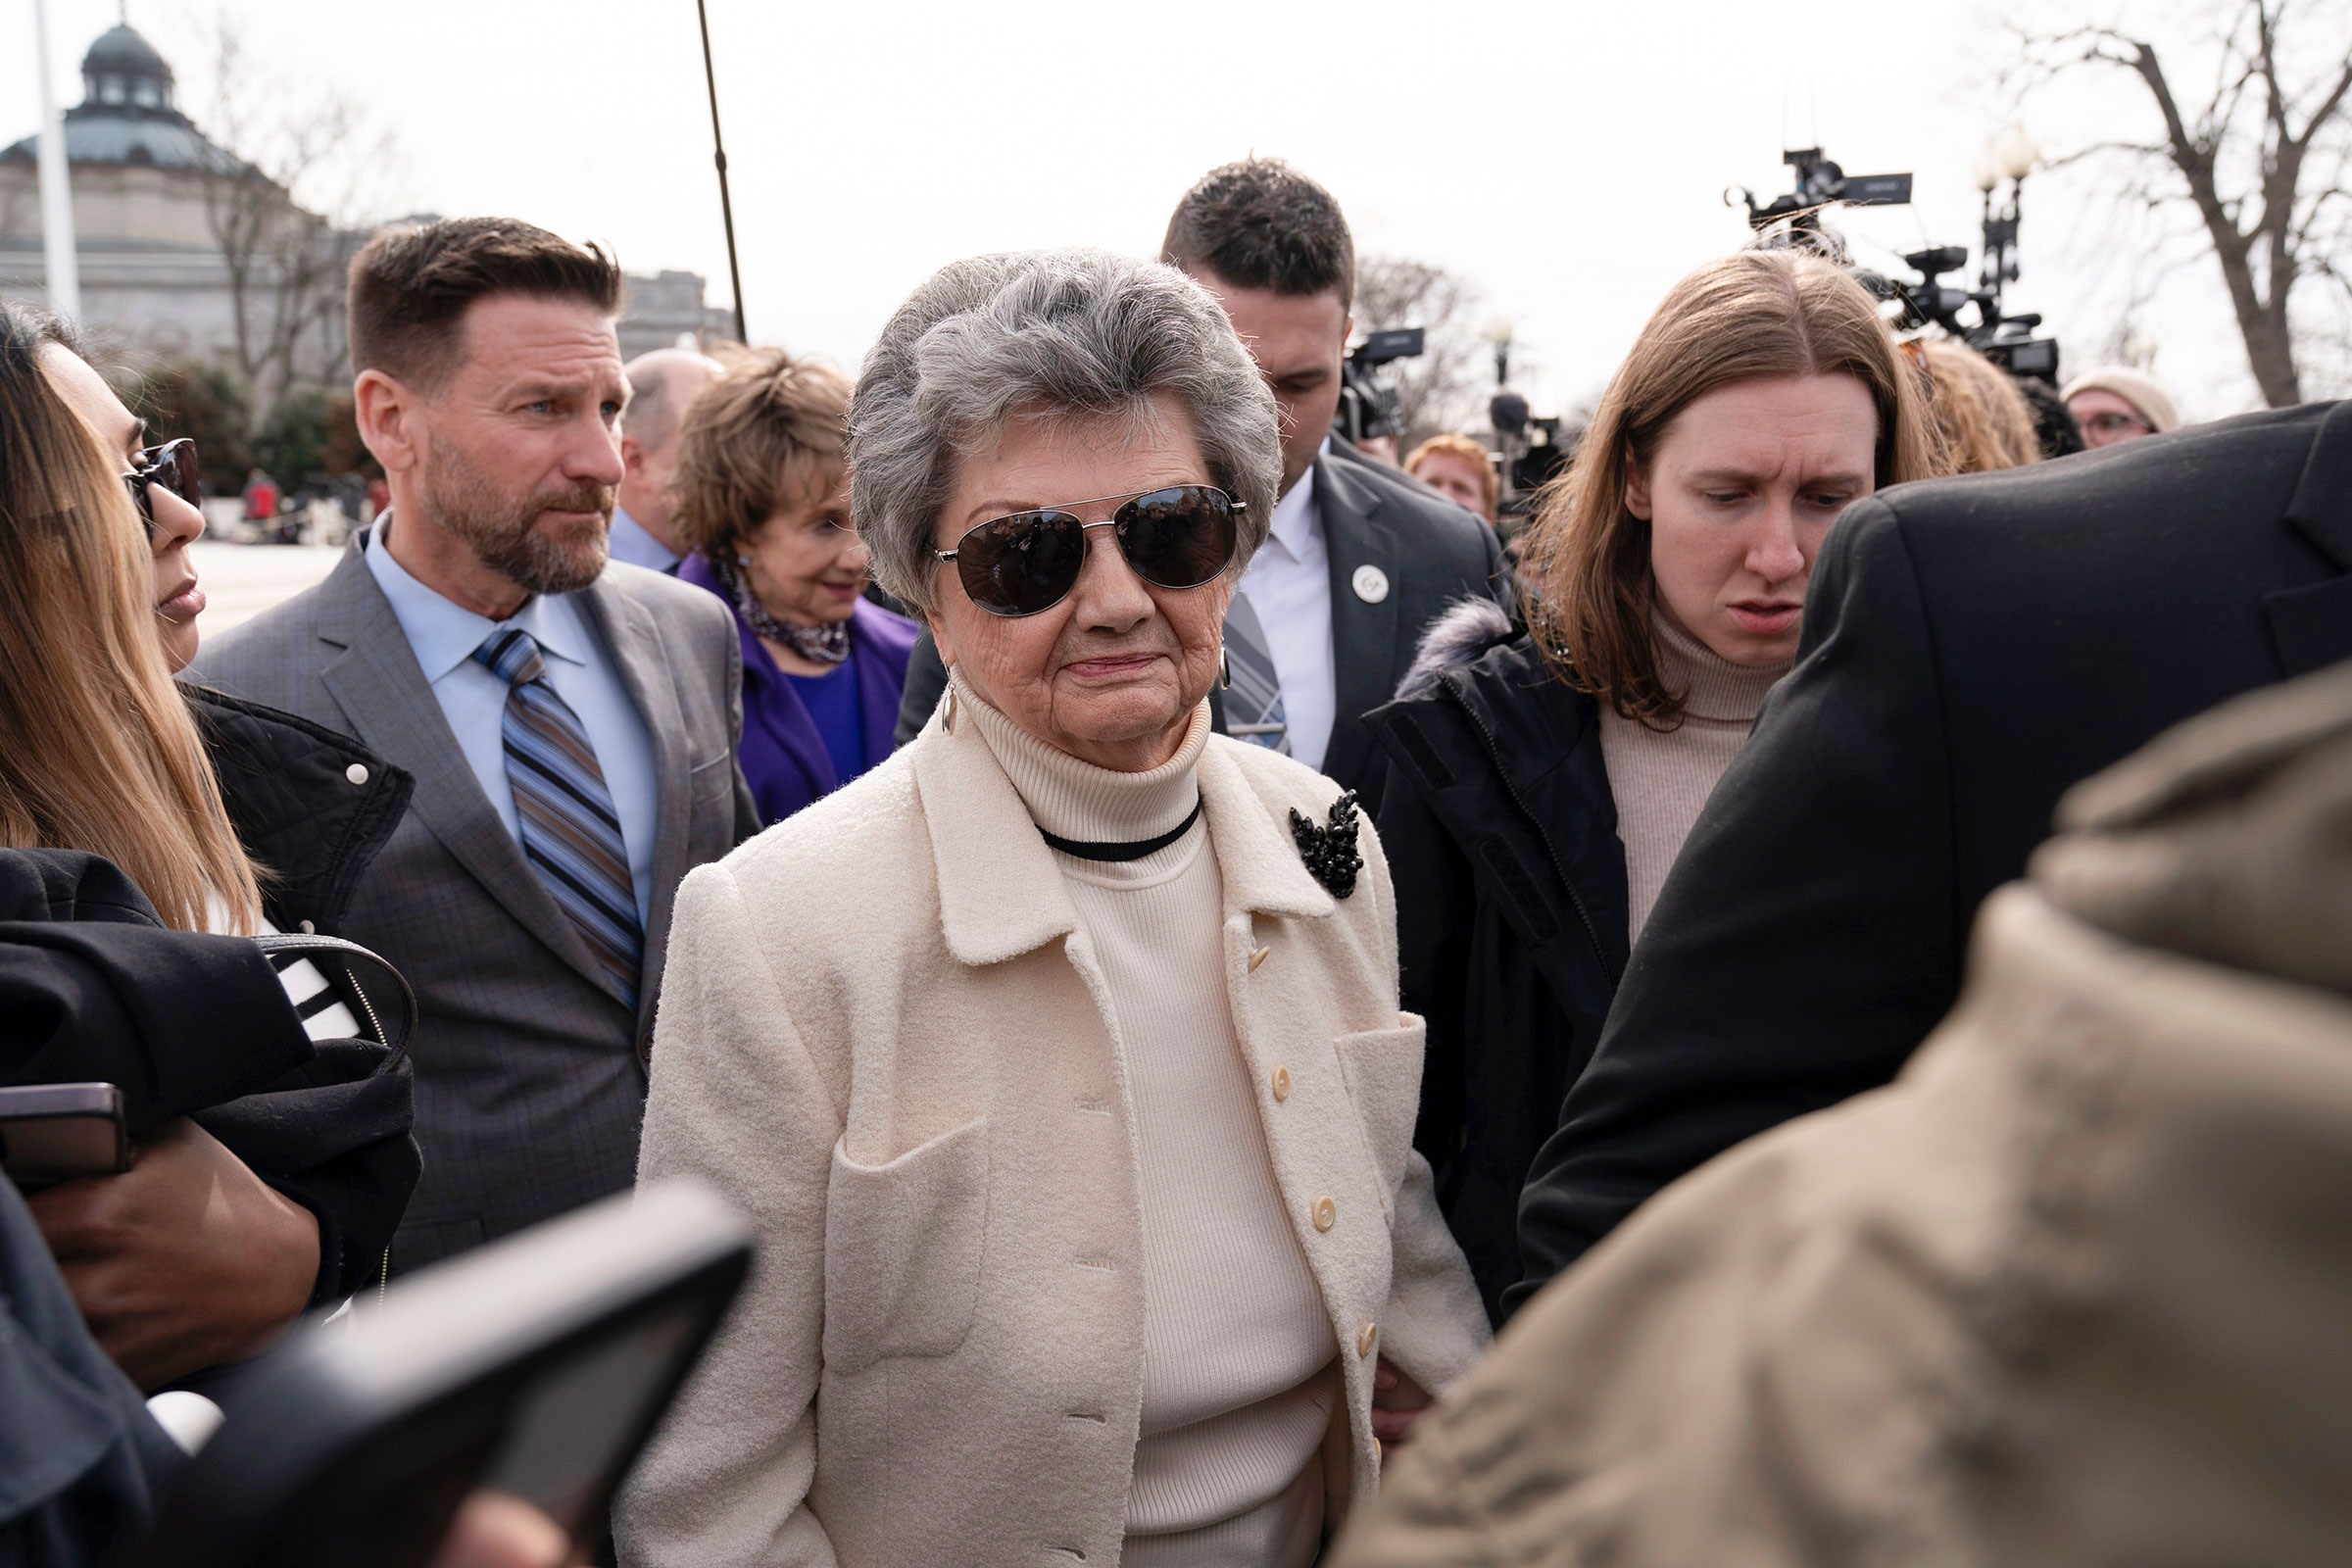 Colorado lead plaintiff Norma Anderson leaves after speaking to the media after the court hearing outside of the US Supreme Court on February 8 in Washington, DC.